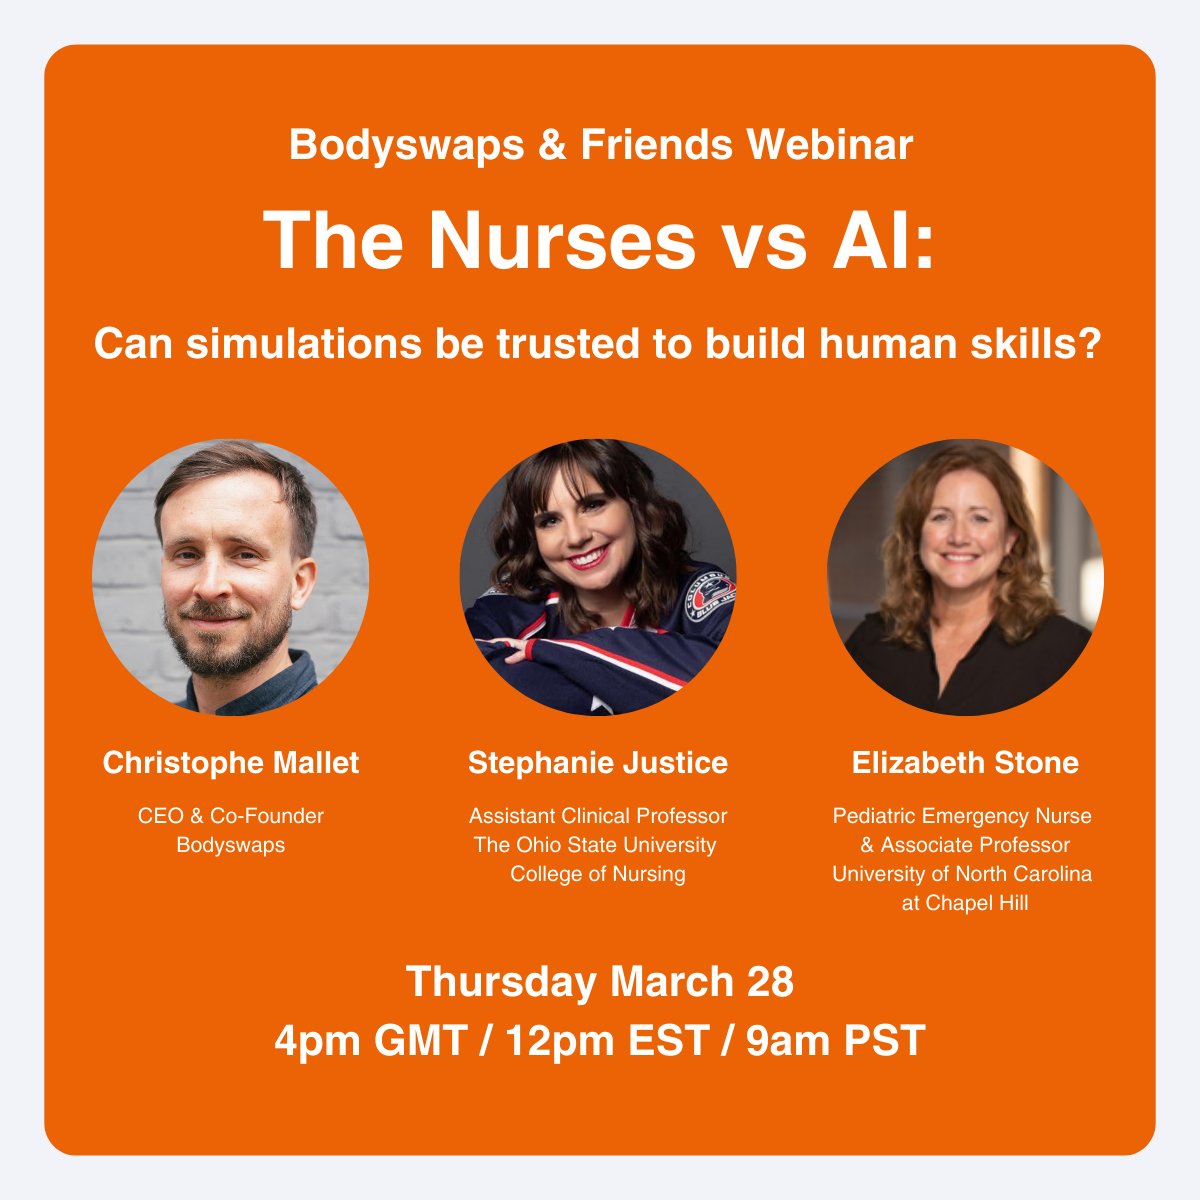 One hour to go until our webinar The Nurses vs AI: Can Simulations be Trusted to Build Human Skills? You're not too late to register - sign up below to ensure you don't miss out on exclusive insights from our experts: bit.ly/3TM3vfz #AIinNursingEducation